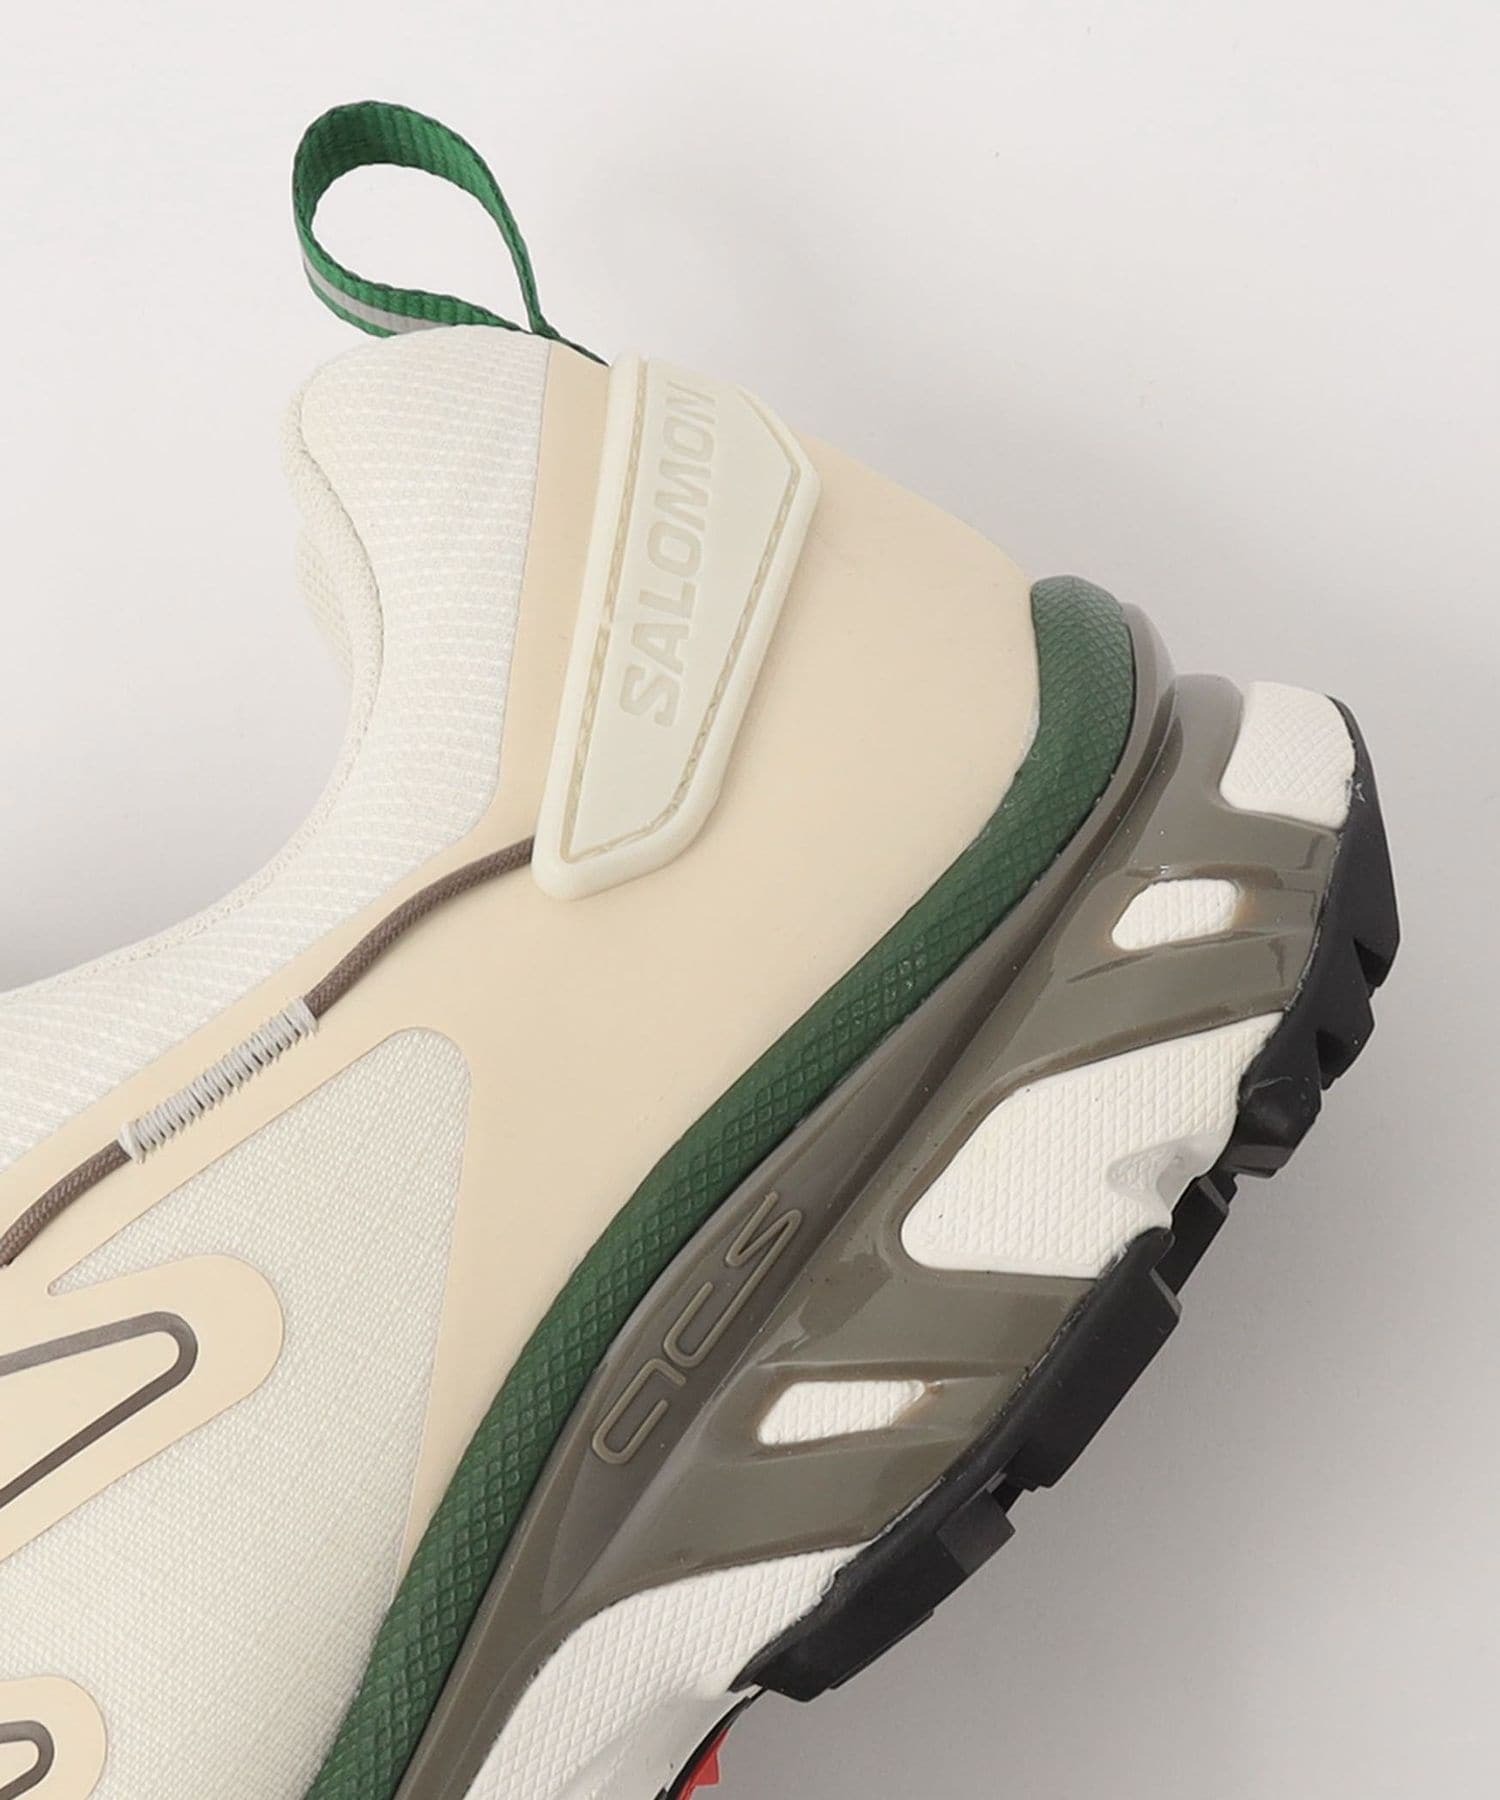 Salomon & BEAUTY & YOUTH UNITED ARROWS' XT-Rush 2 GORE-TEX sneaker collab in beige and cream colorway